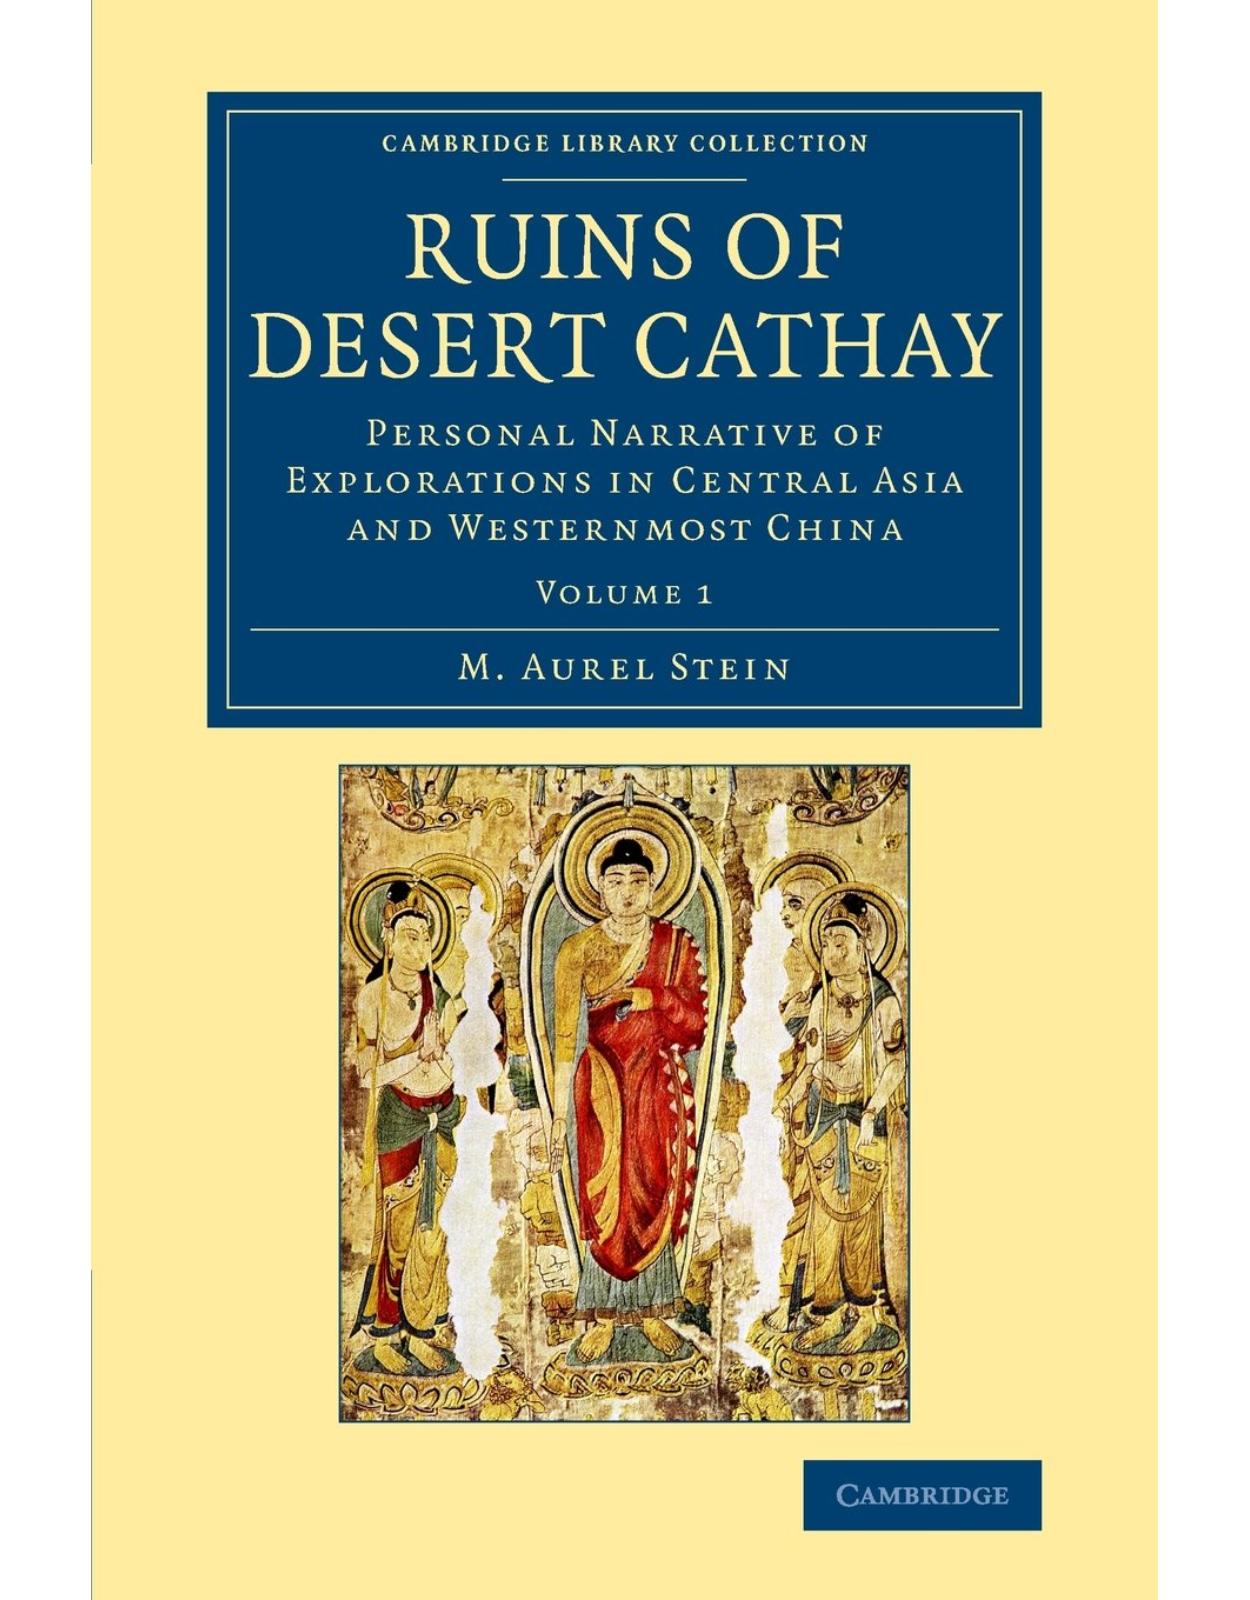 Ruins of Desert Cathay 2 Volume Set: Ruins of Desert Cathay: Personal Narrative of Explorations in Central Asia and Westernmost China: Volume 1 (Cambridge Library Collection - Archaeology)